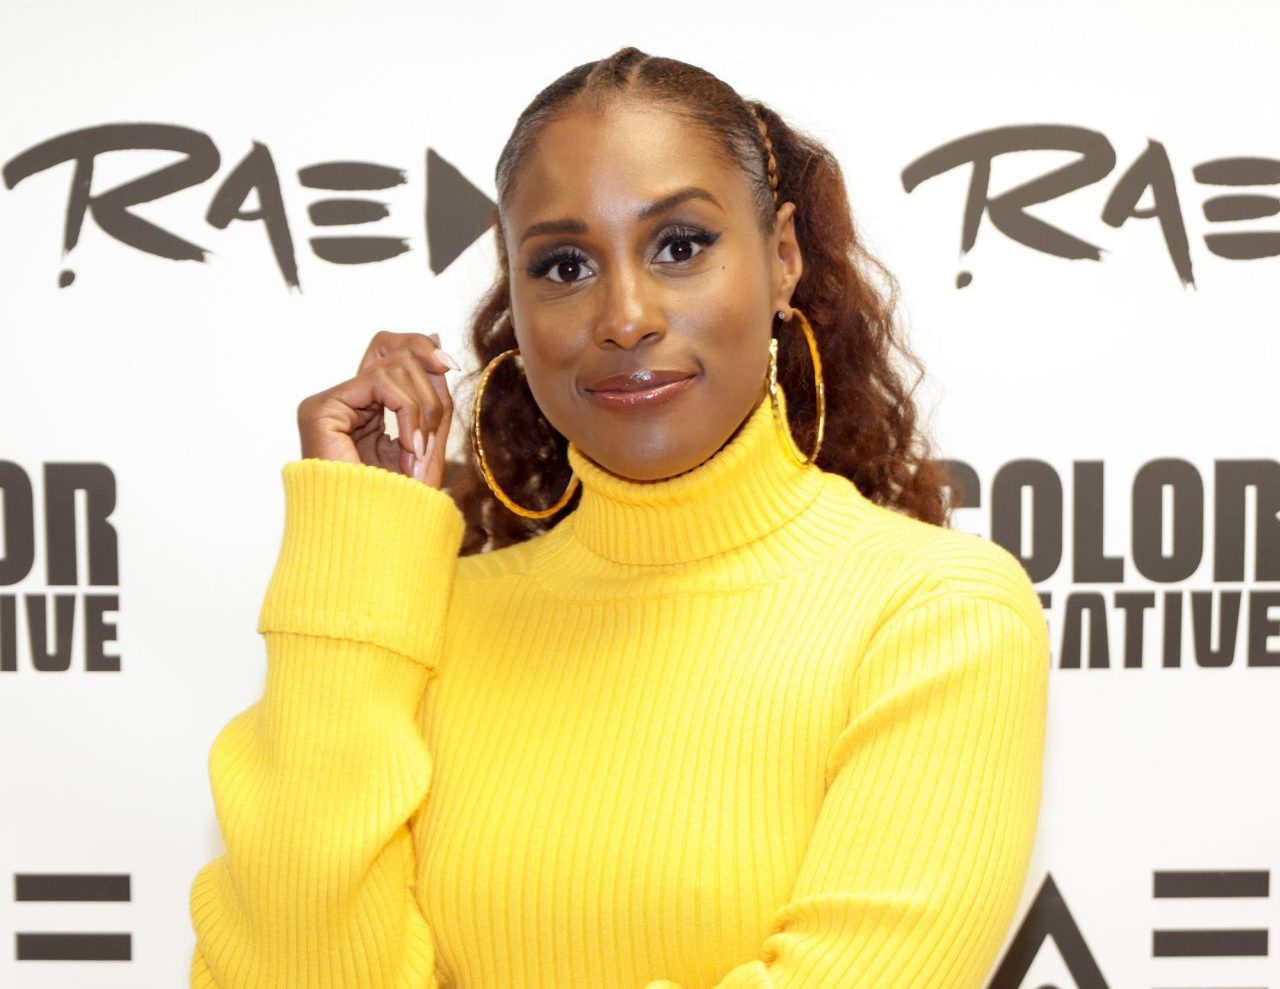 Issa Rae Asks Twitter To Let Her "Eat, Drink And Be Merry" After Shutting Down Pregnancy Rumors